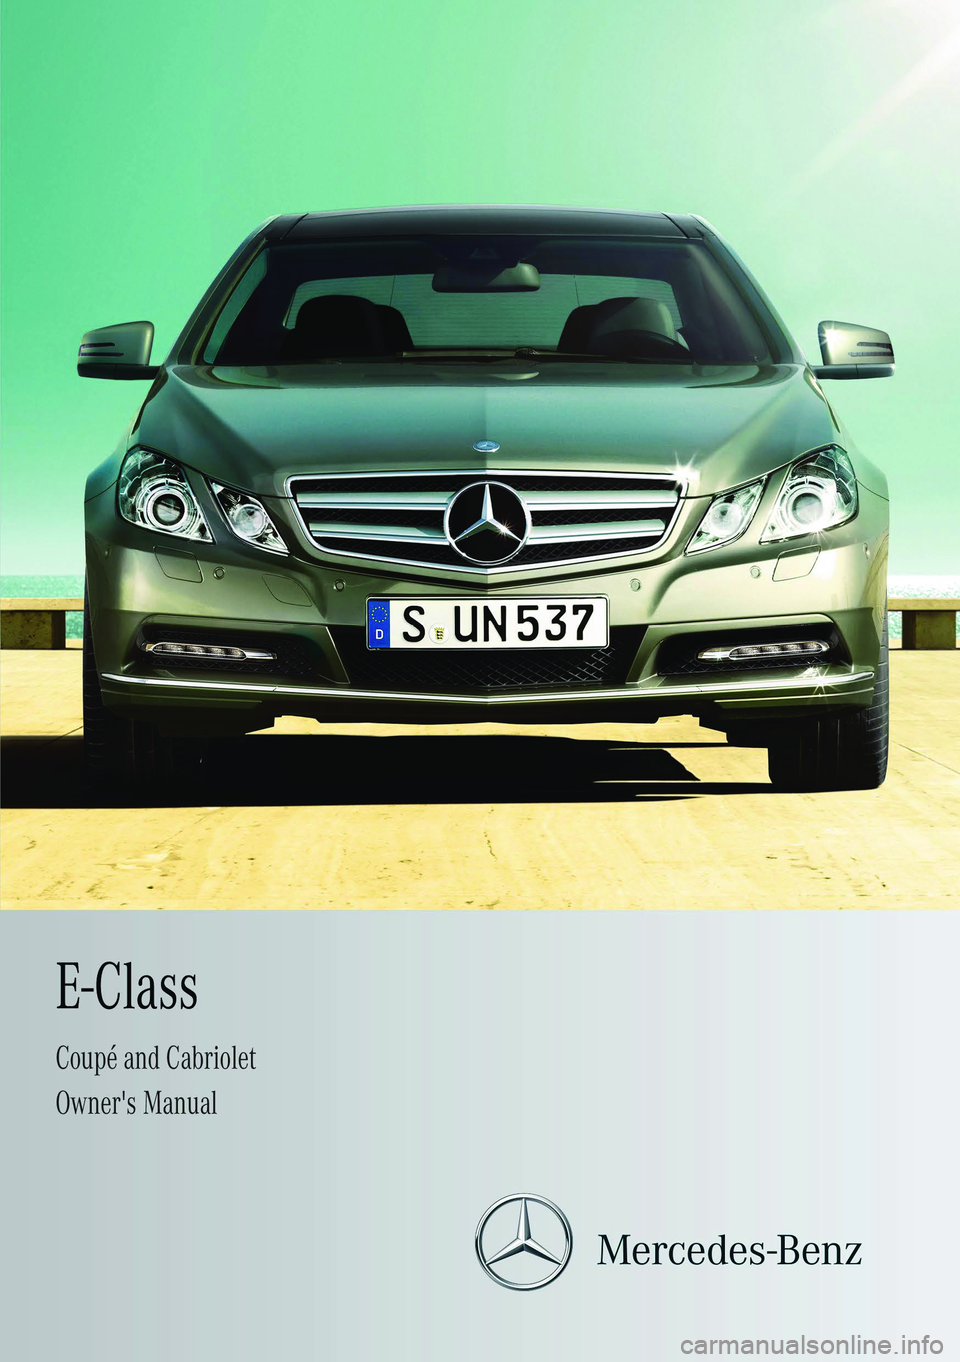 MERCEDES-BENZ E-CLASS CABRIOLET 2011  Owners Manual 